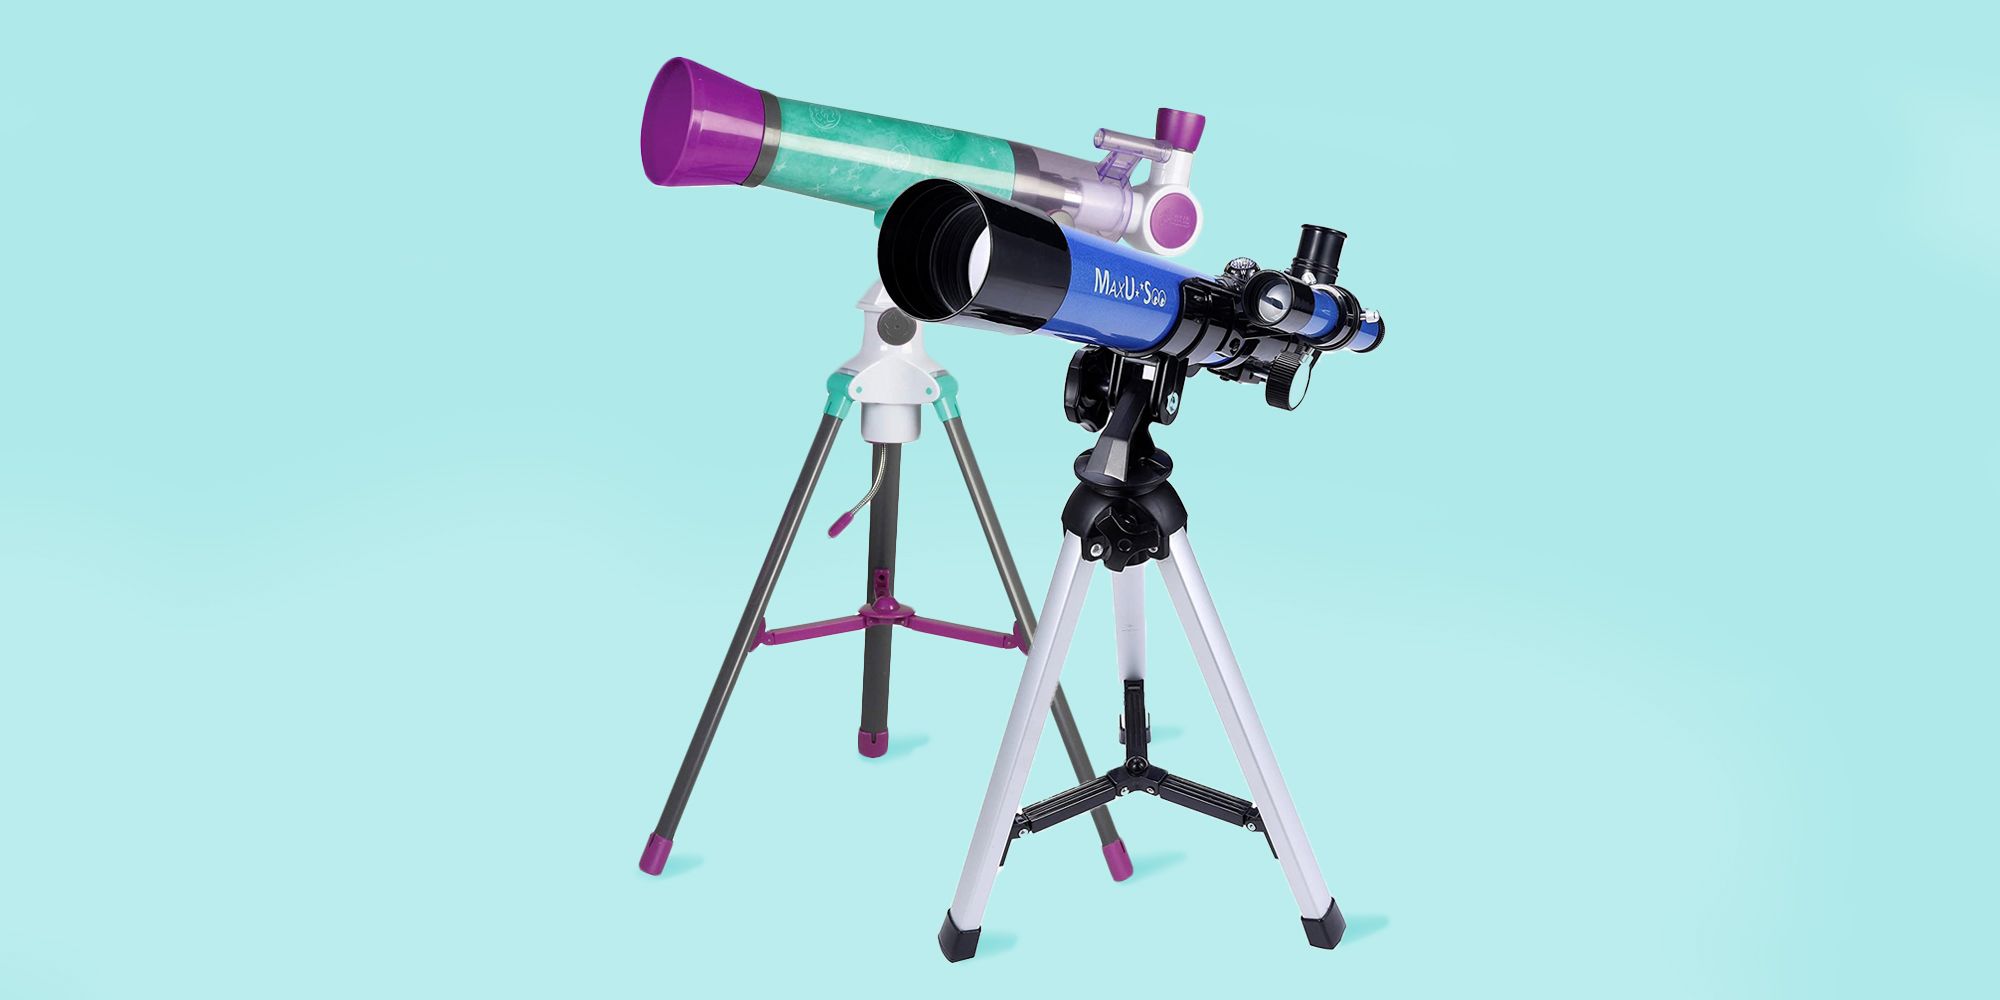 20x/30x/40x Beginner Monocular Telescope Professional Science Telescopes for Astronomy with Tripod 3 Eyepieces Portable for Children Telescope for Kids Beginners 